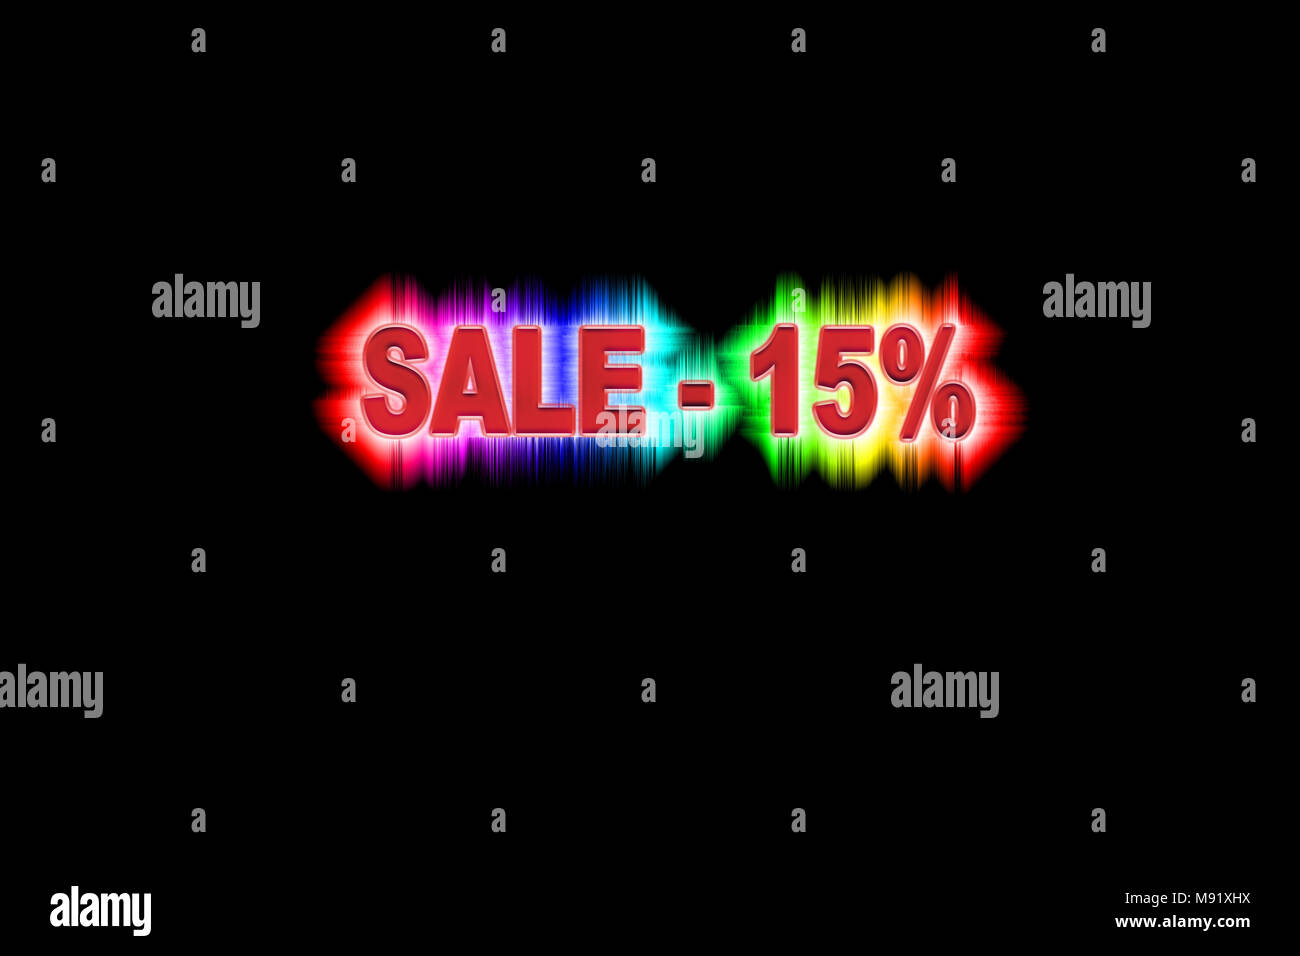 The discount is fifteen percent of the simulated volume with a rainbow glow on a black background Stock Photo